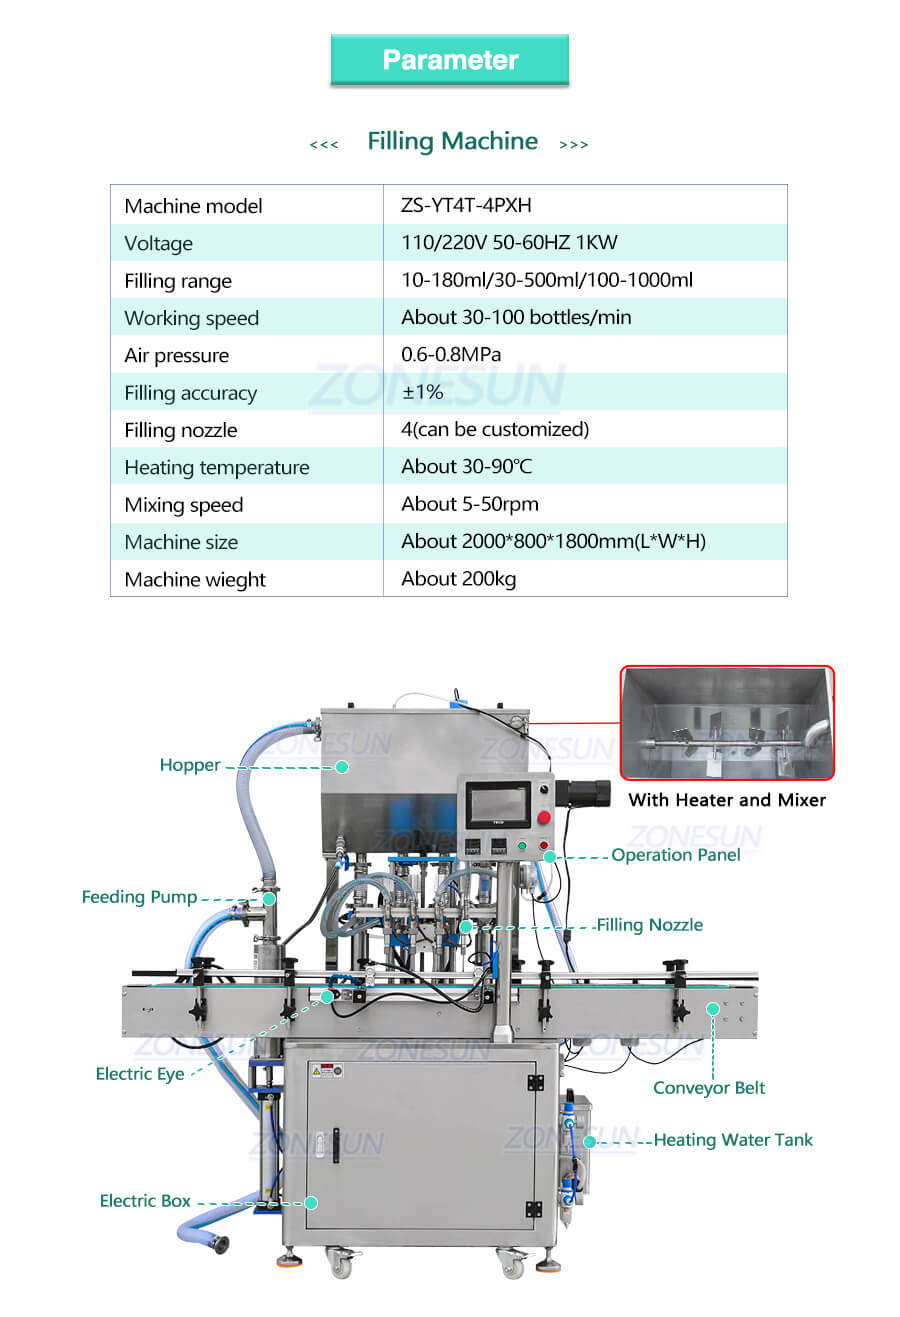 Parameter of Automatic Paste Filling Machine